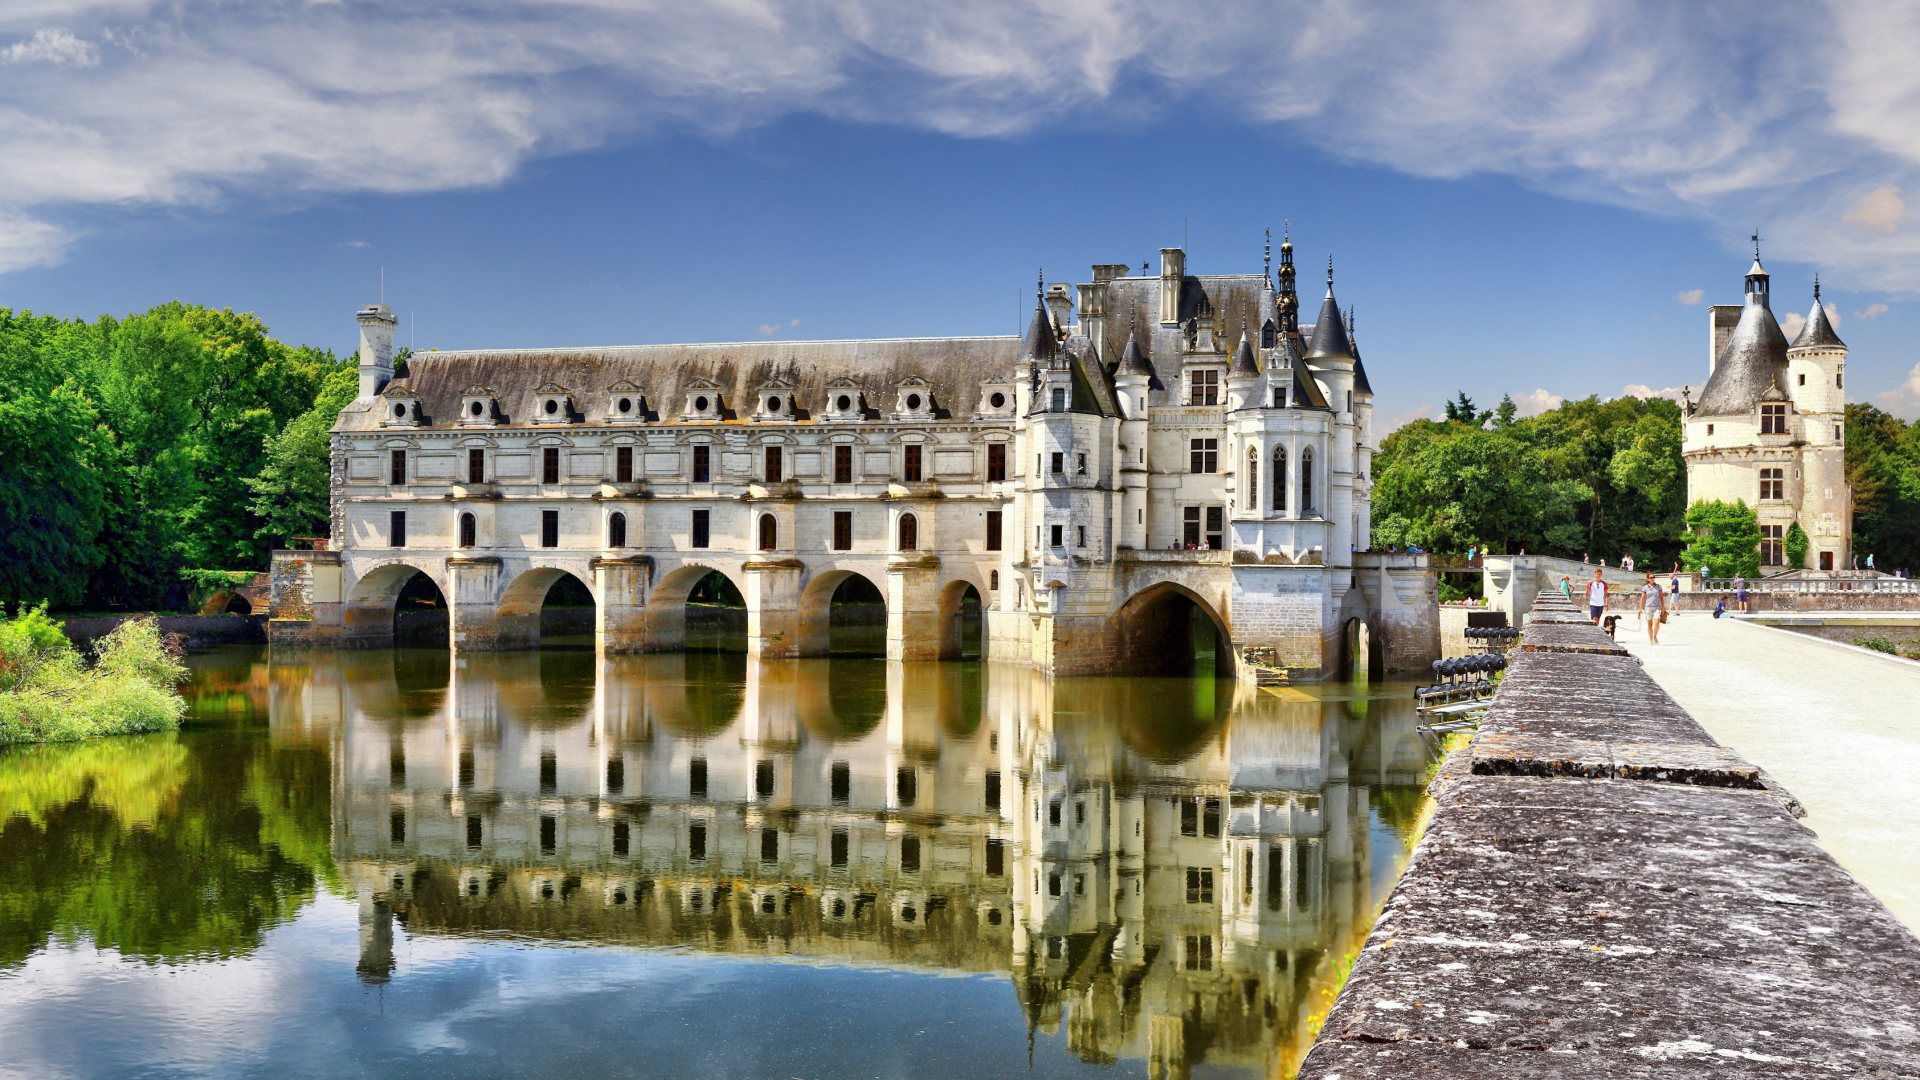 Beautiful old castle Chenonceau, France